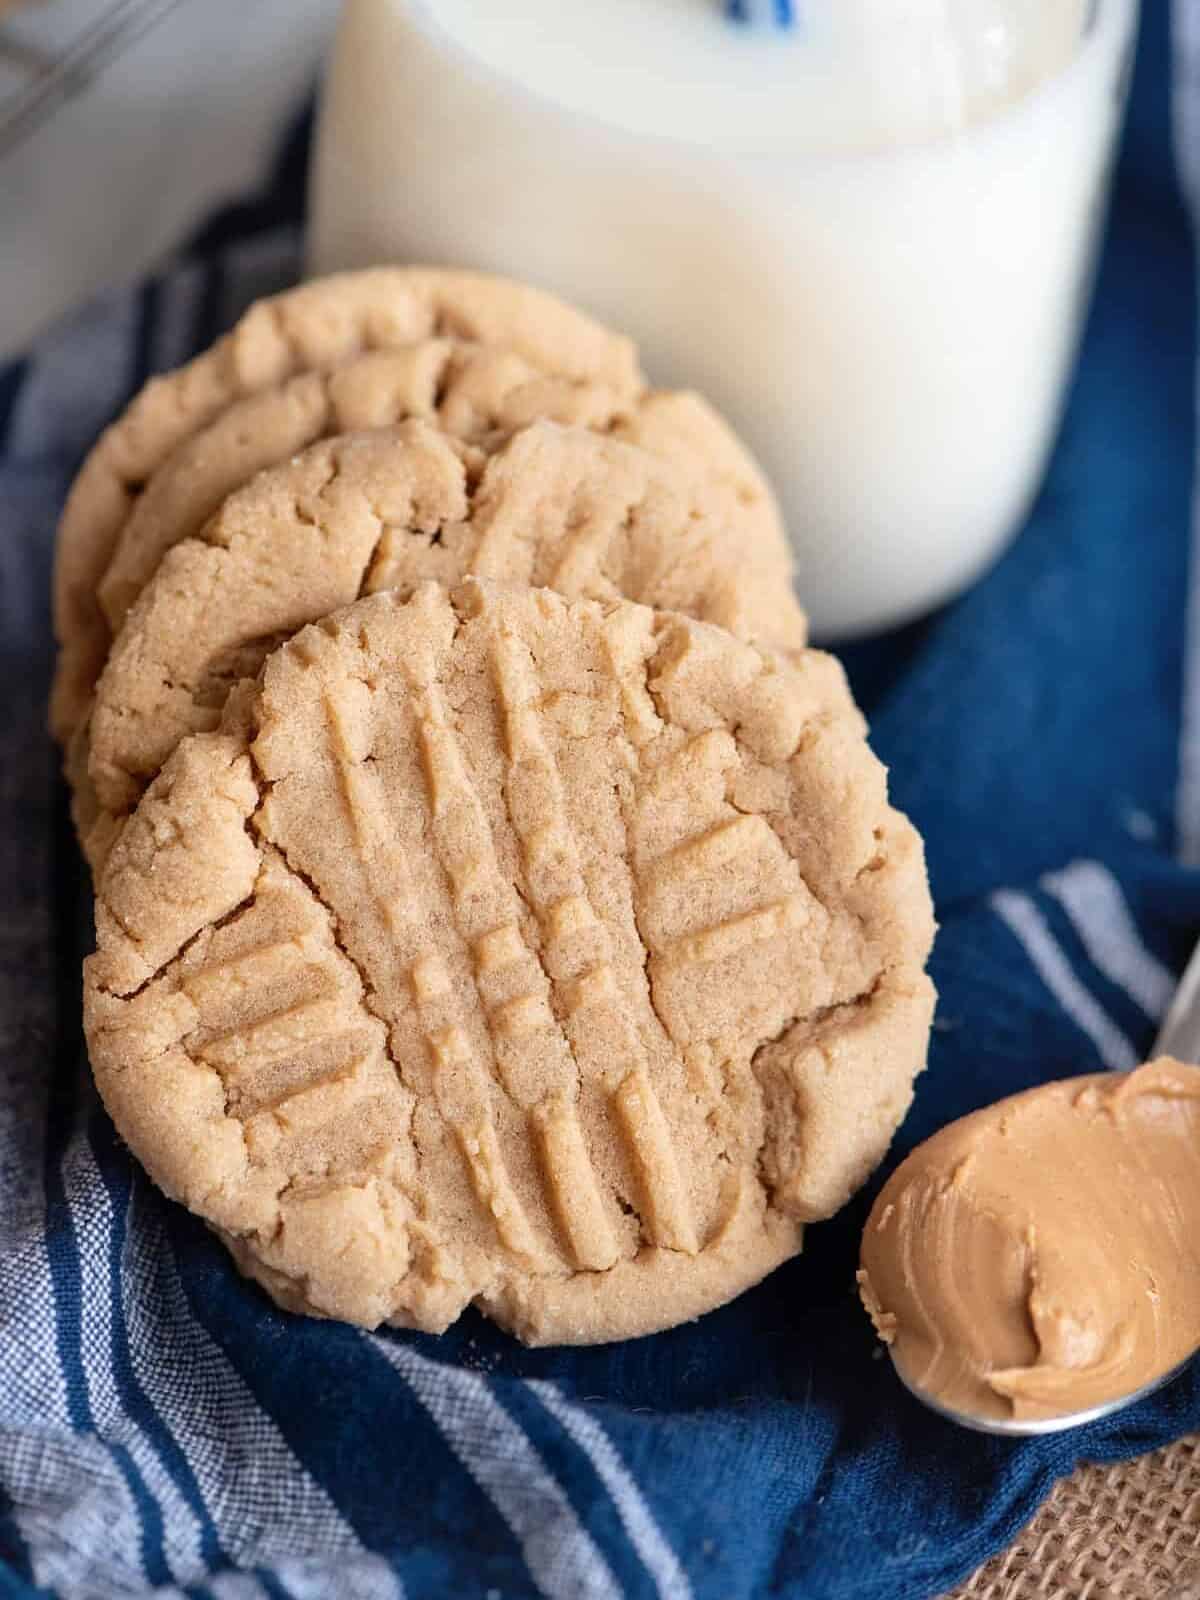 peanut butter cookies next to a glass of milk